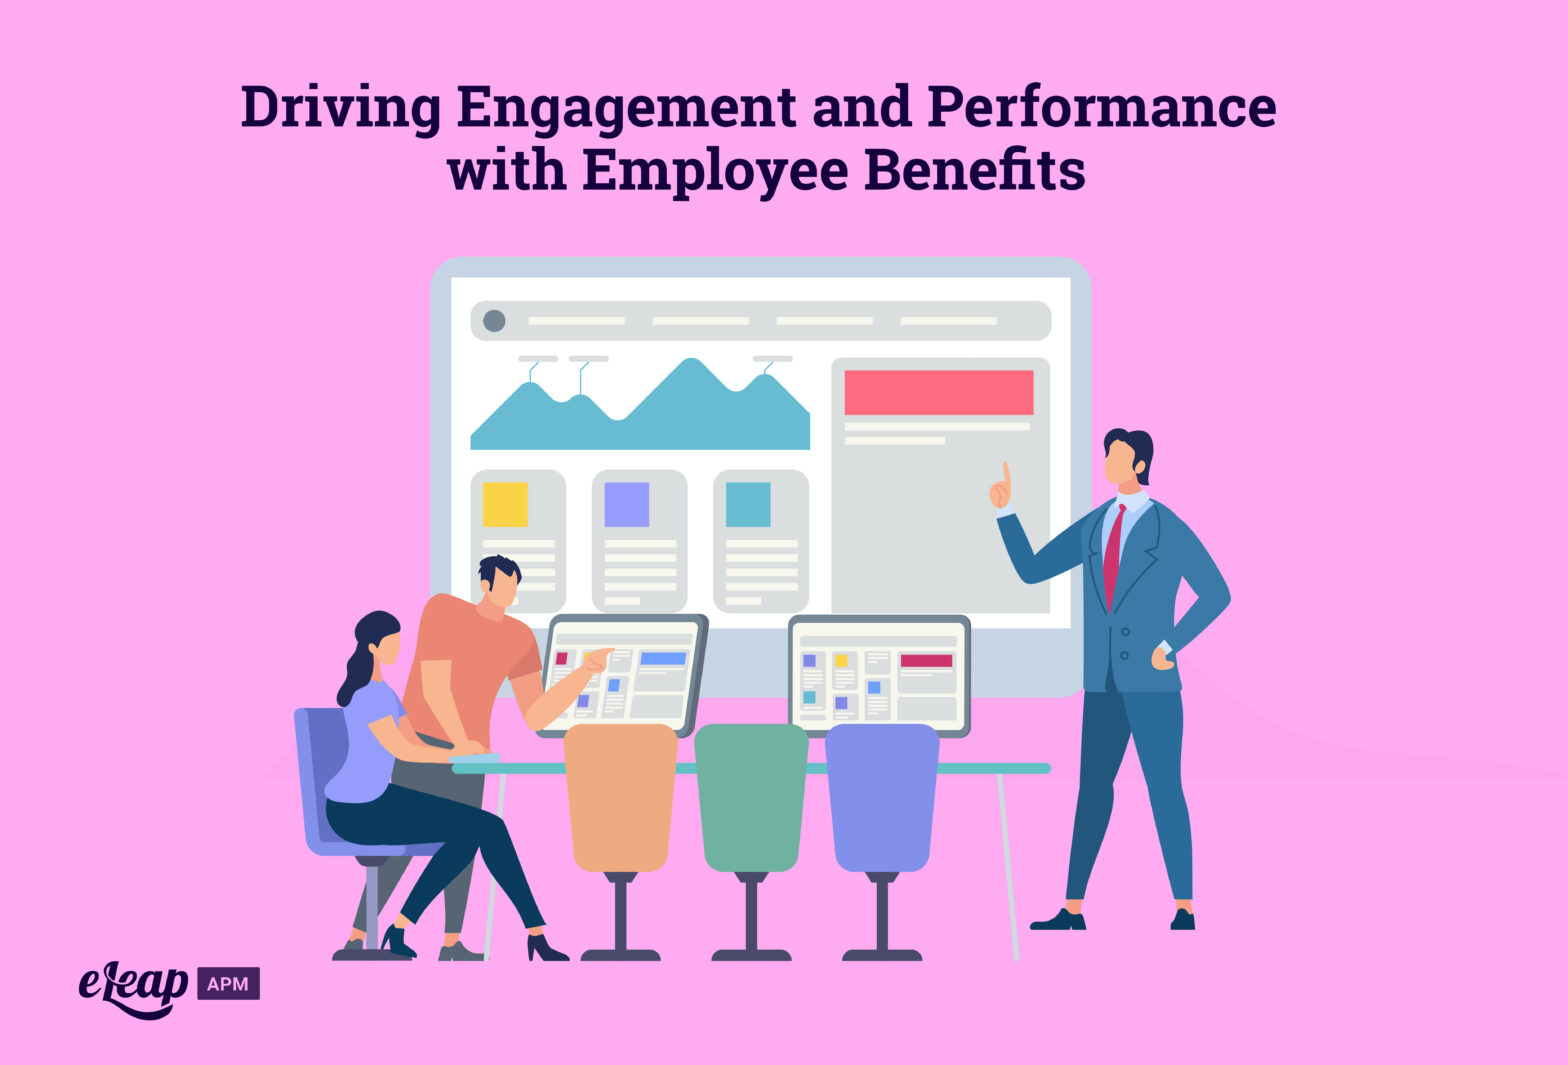 Driving Engagement and Performance with Employee Benefits